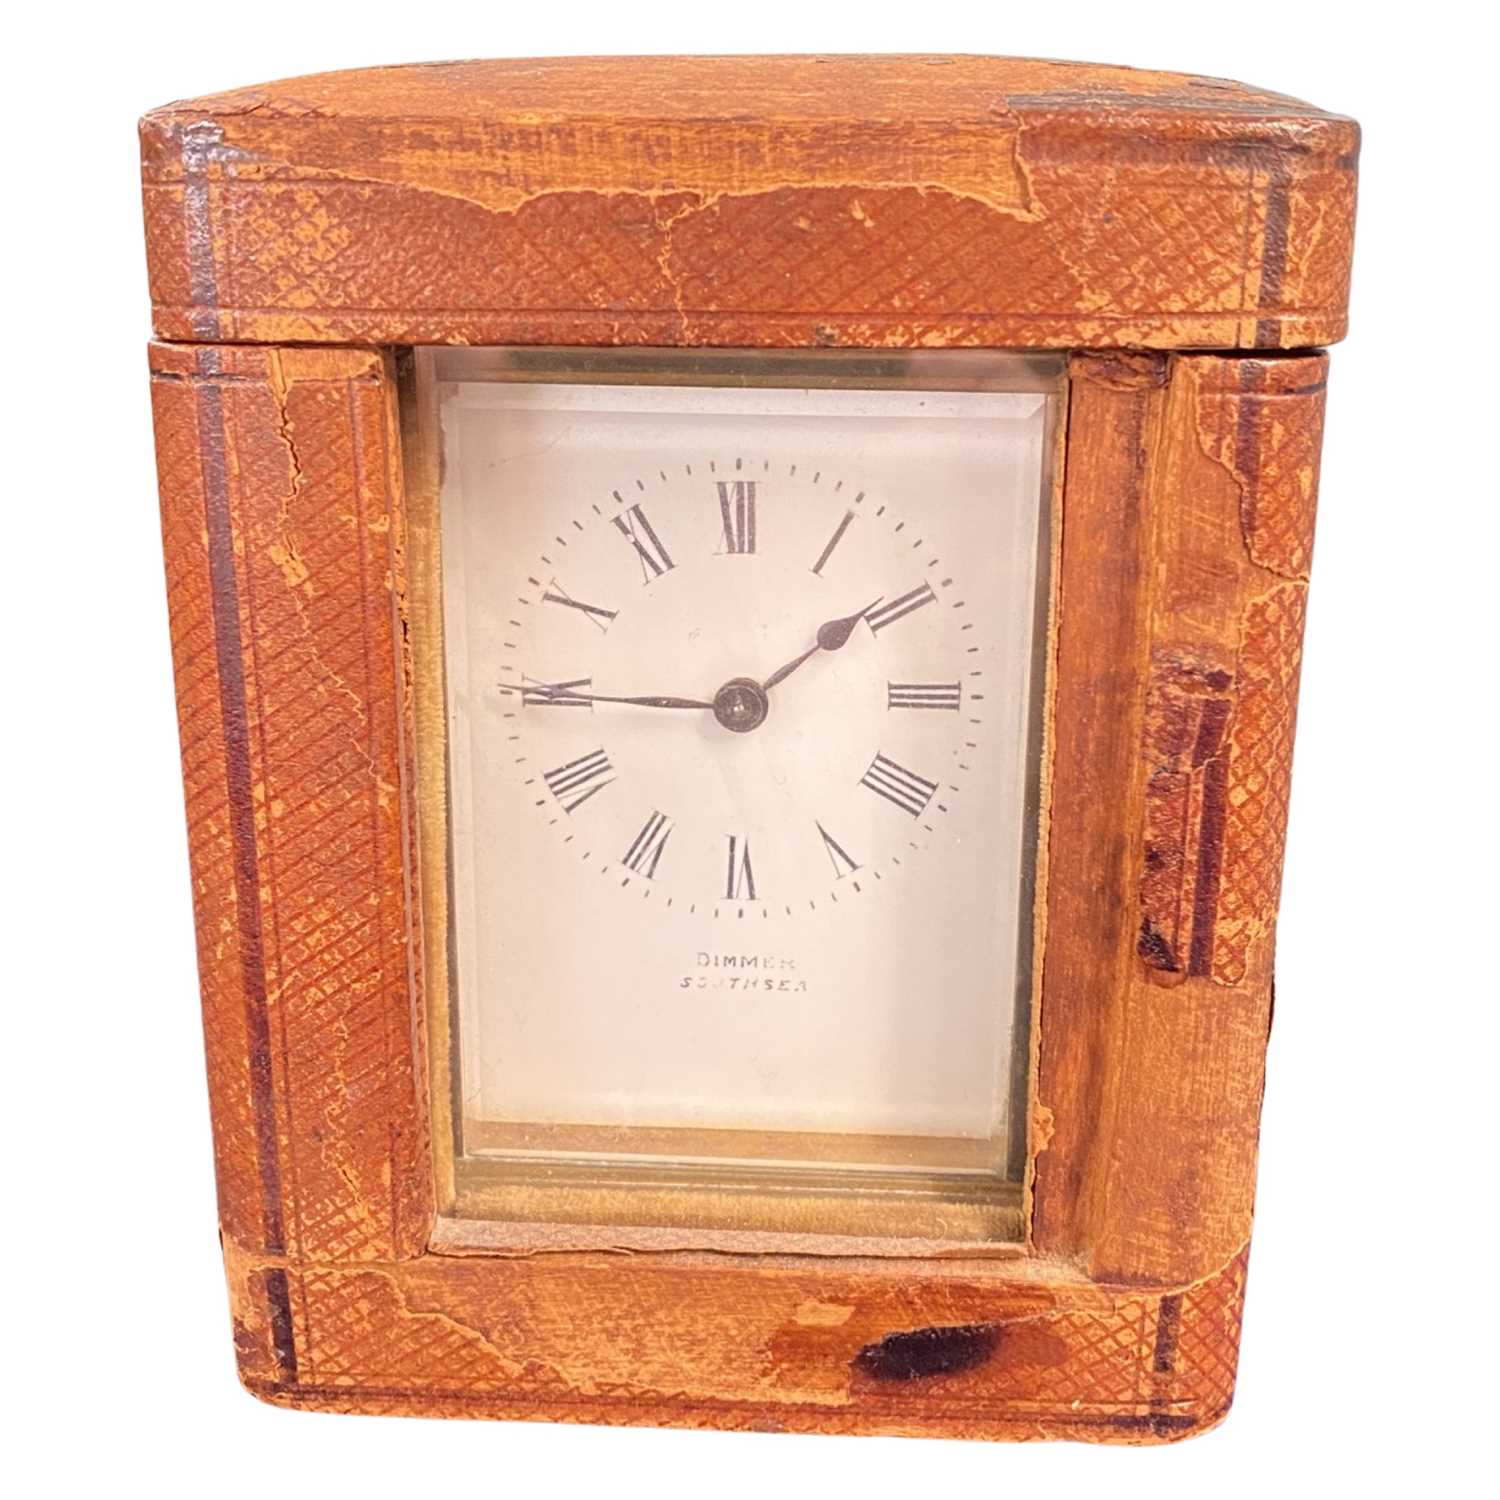 A brass cased carriage clock, Dimmer, Southsea